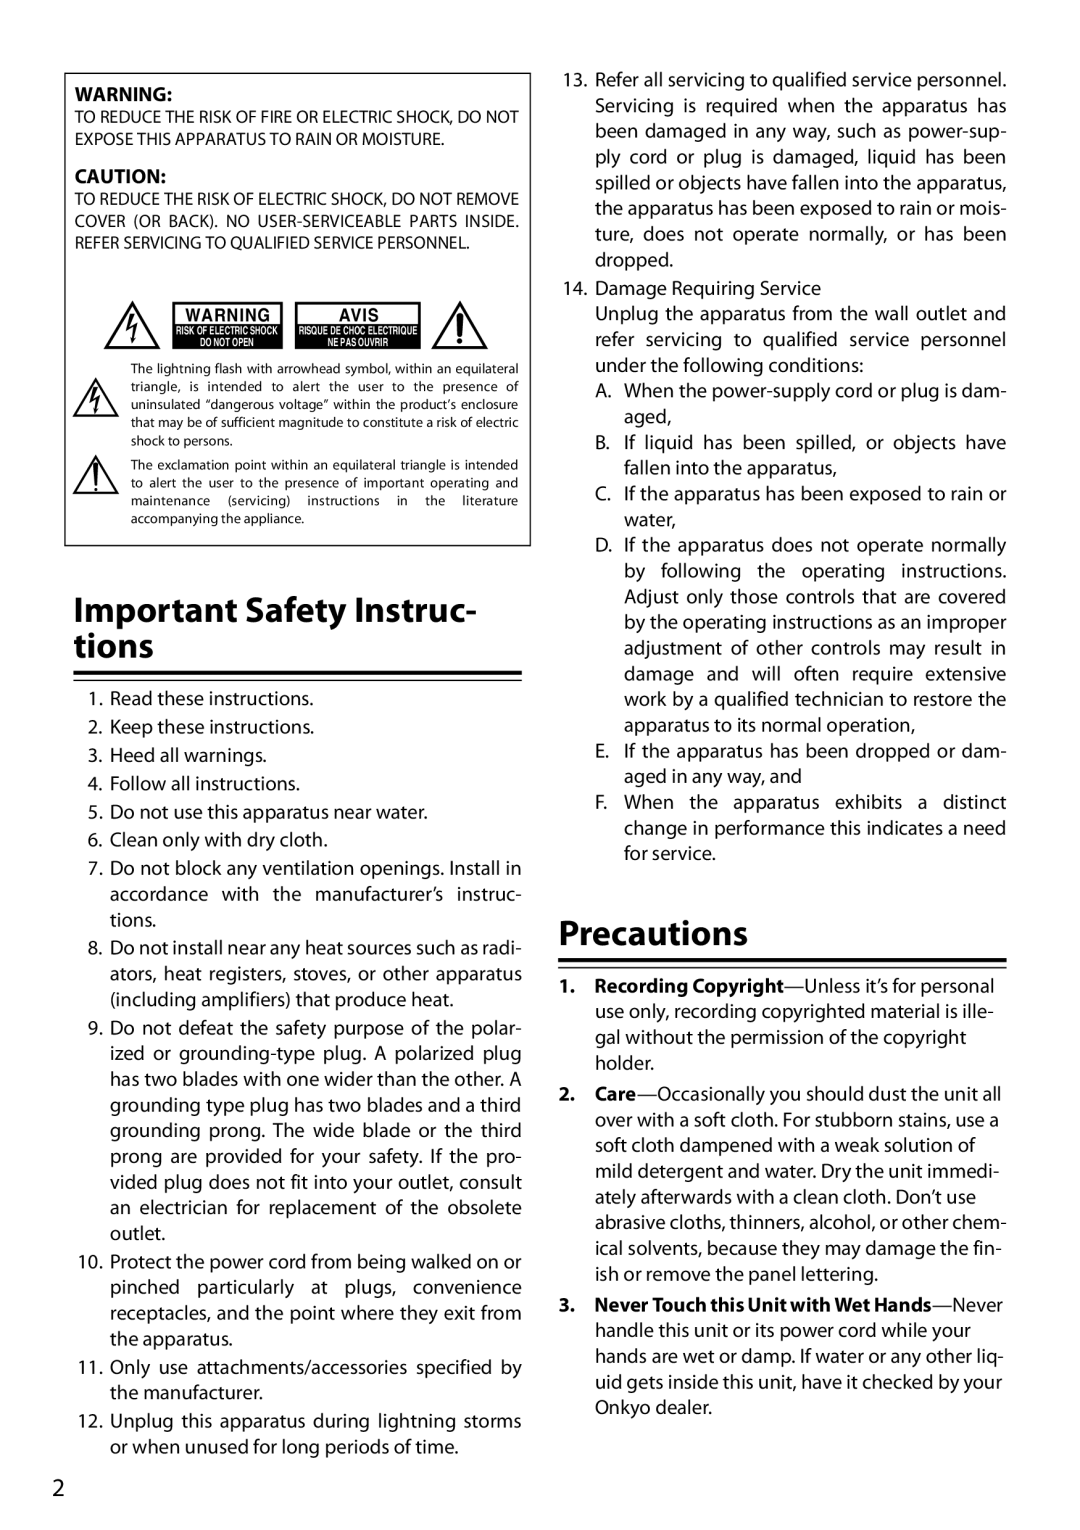 Onkyo DS-A4 instruction manual Important Safety Instruc- tions, Precautions 